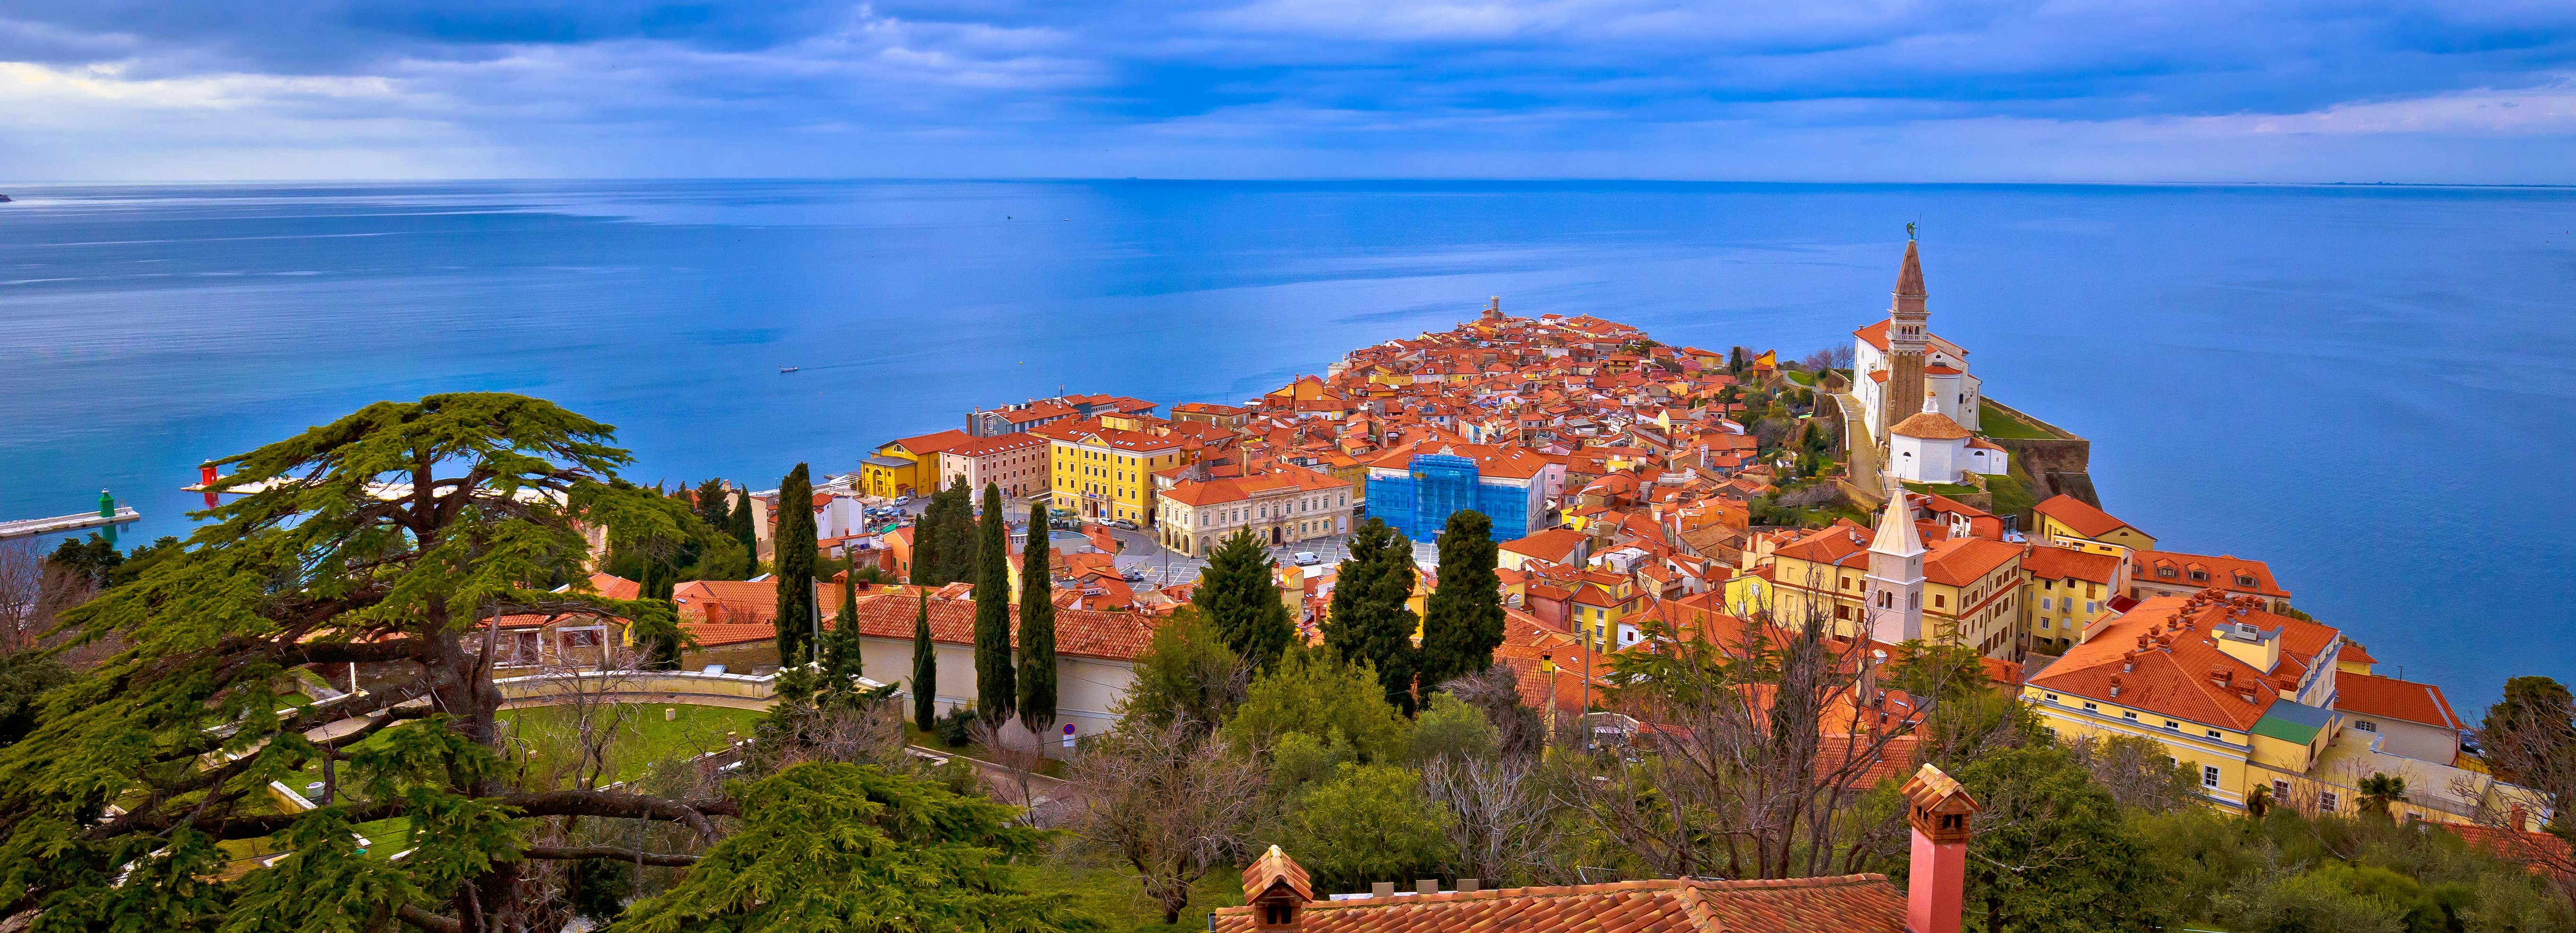 Guided tour of Piran and the Slovenian coast from Trieste